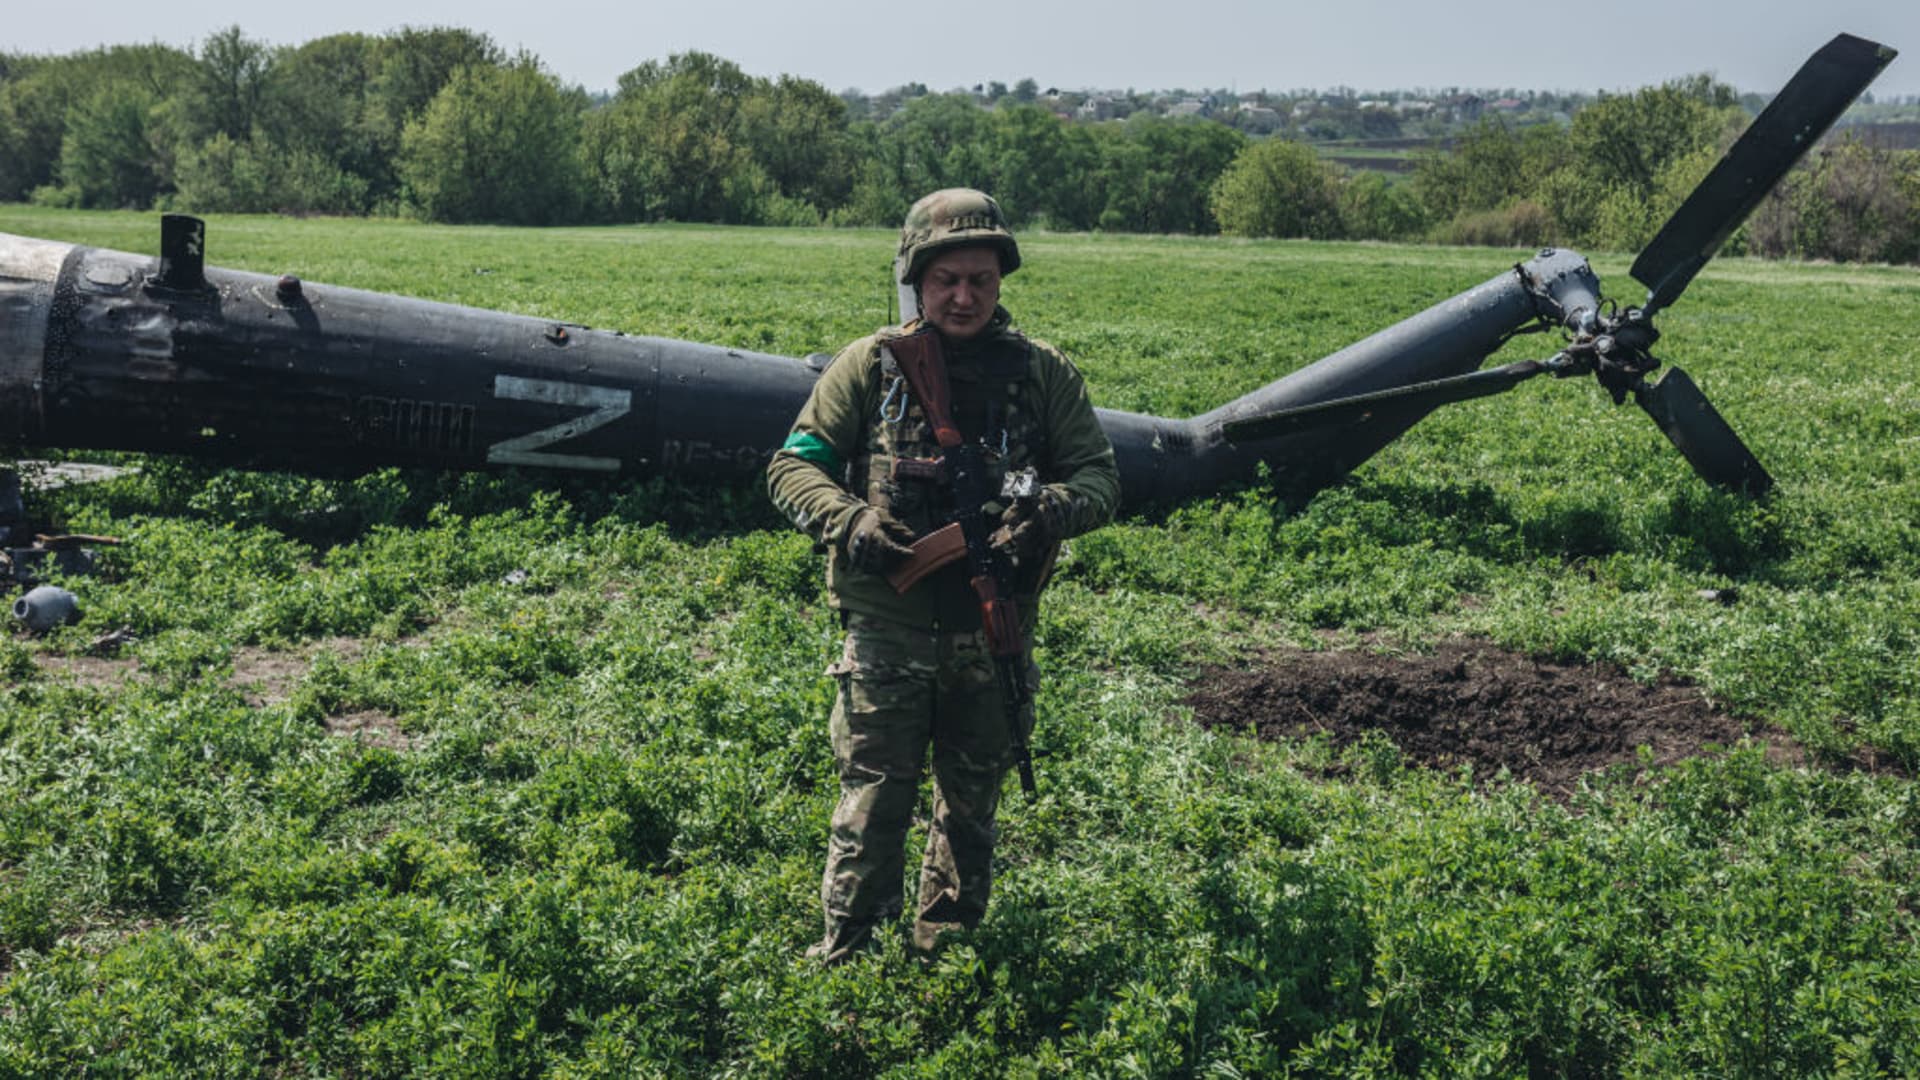 Ukrainian soldiers in a downed Russian helicopter in the outskirts of Kharkiv, Ukraine, 8 May 2022.